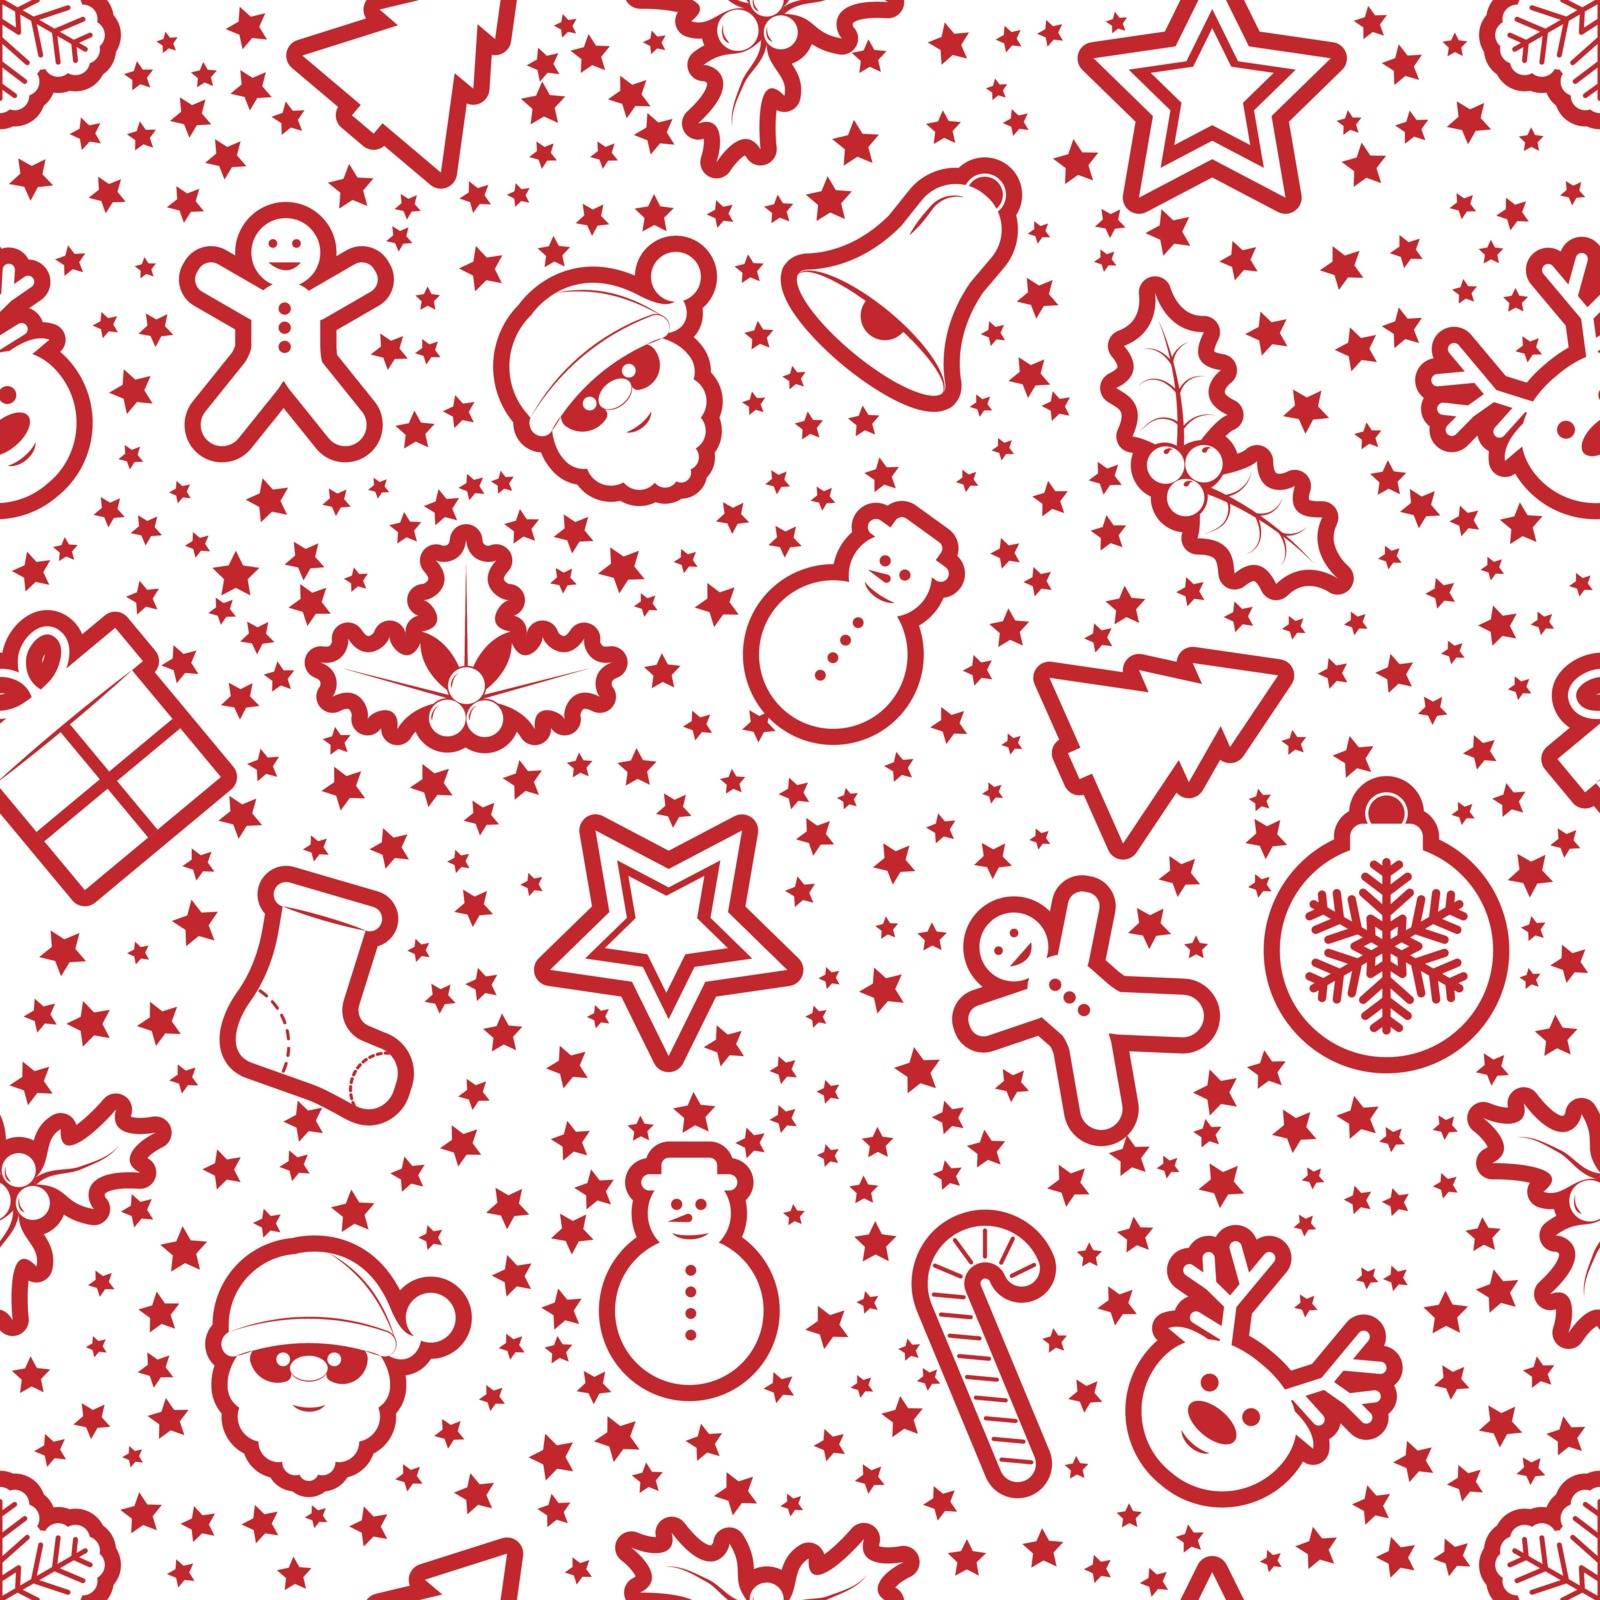 Festive new year seamless background with Christmas decorations. Suitable for textile, packaging, paper printing, simple backgrounds and texture.